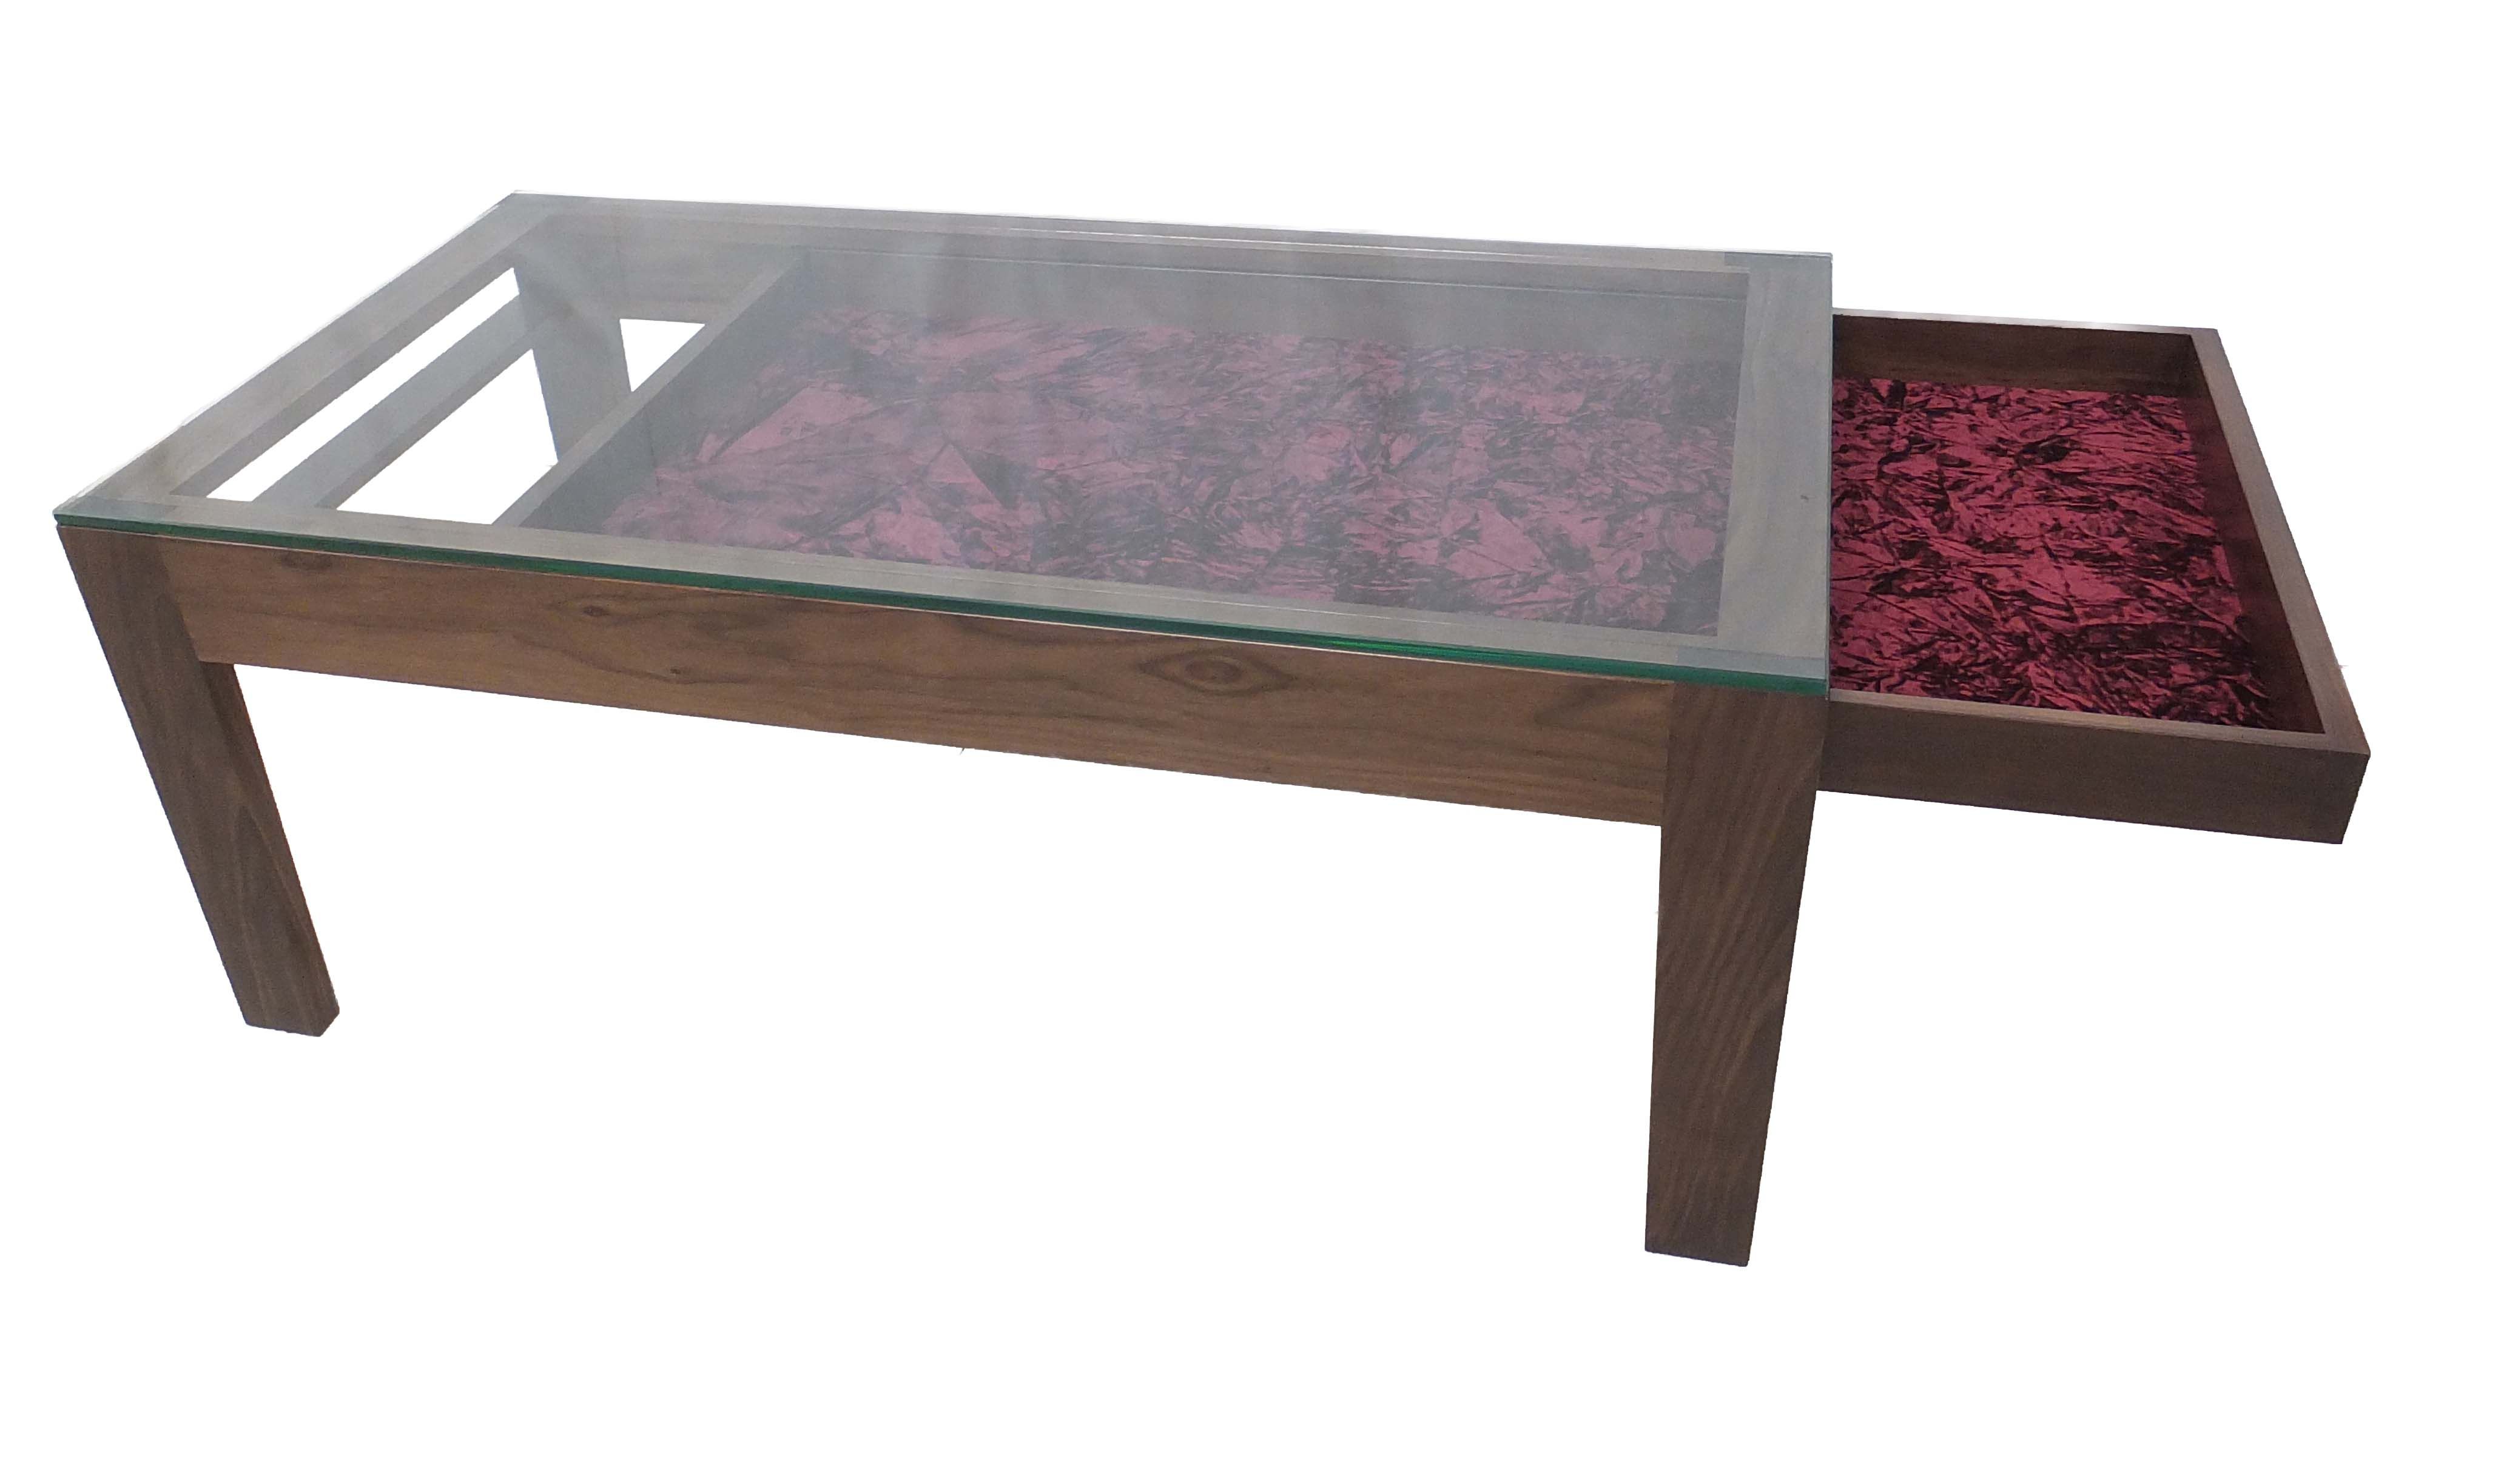 Display Coffee Table With Glass Top Made From Solid American Walnut With 10mm Toughened Glass Top And Sliding Drawer Lined With Crushed Velvet (View 8 of 10)